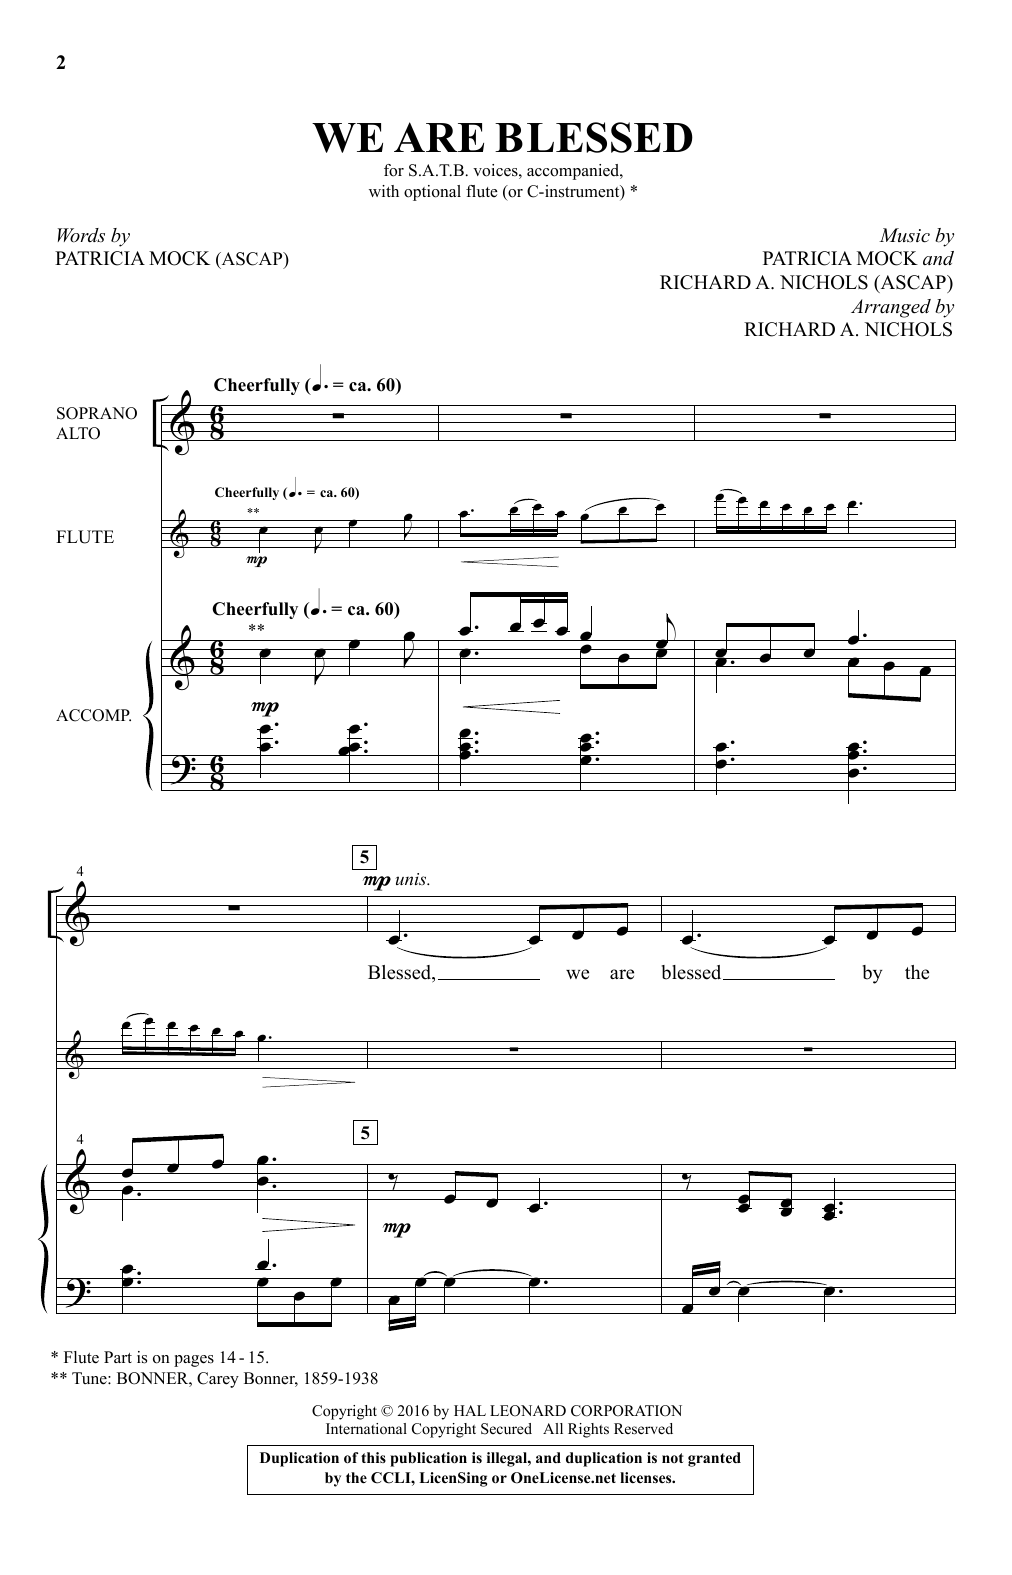 Download Richard Nichols We Are Blessed Sheet Music